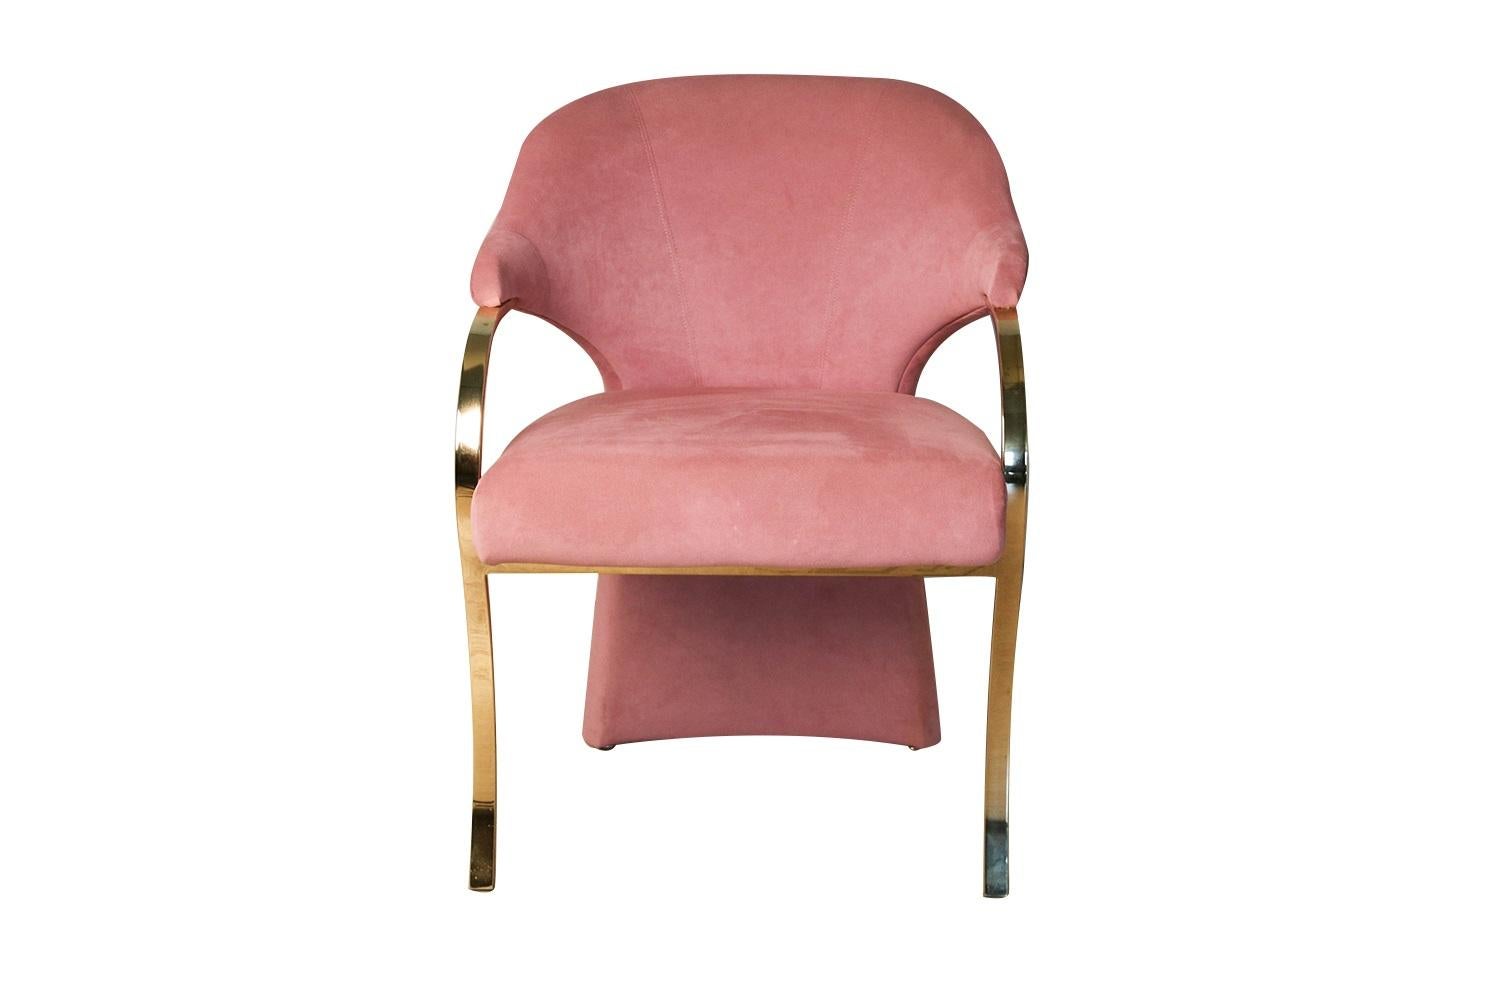 Vintage Hollywood Regency upholstered Carson’s armchair in great modern form, featuring a brass cantilever frame with a barrel backrest. Detailed raised soft padded seat cushion in original lush rose upholstery, and continuous arm to leg design with